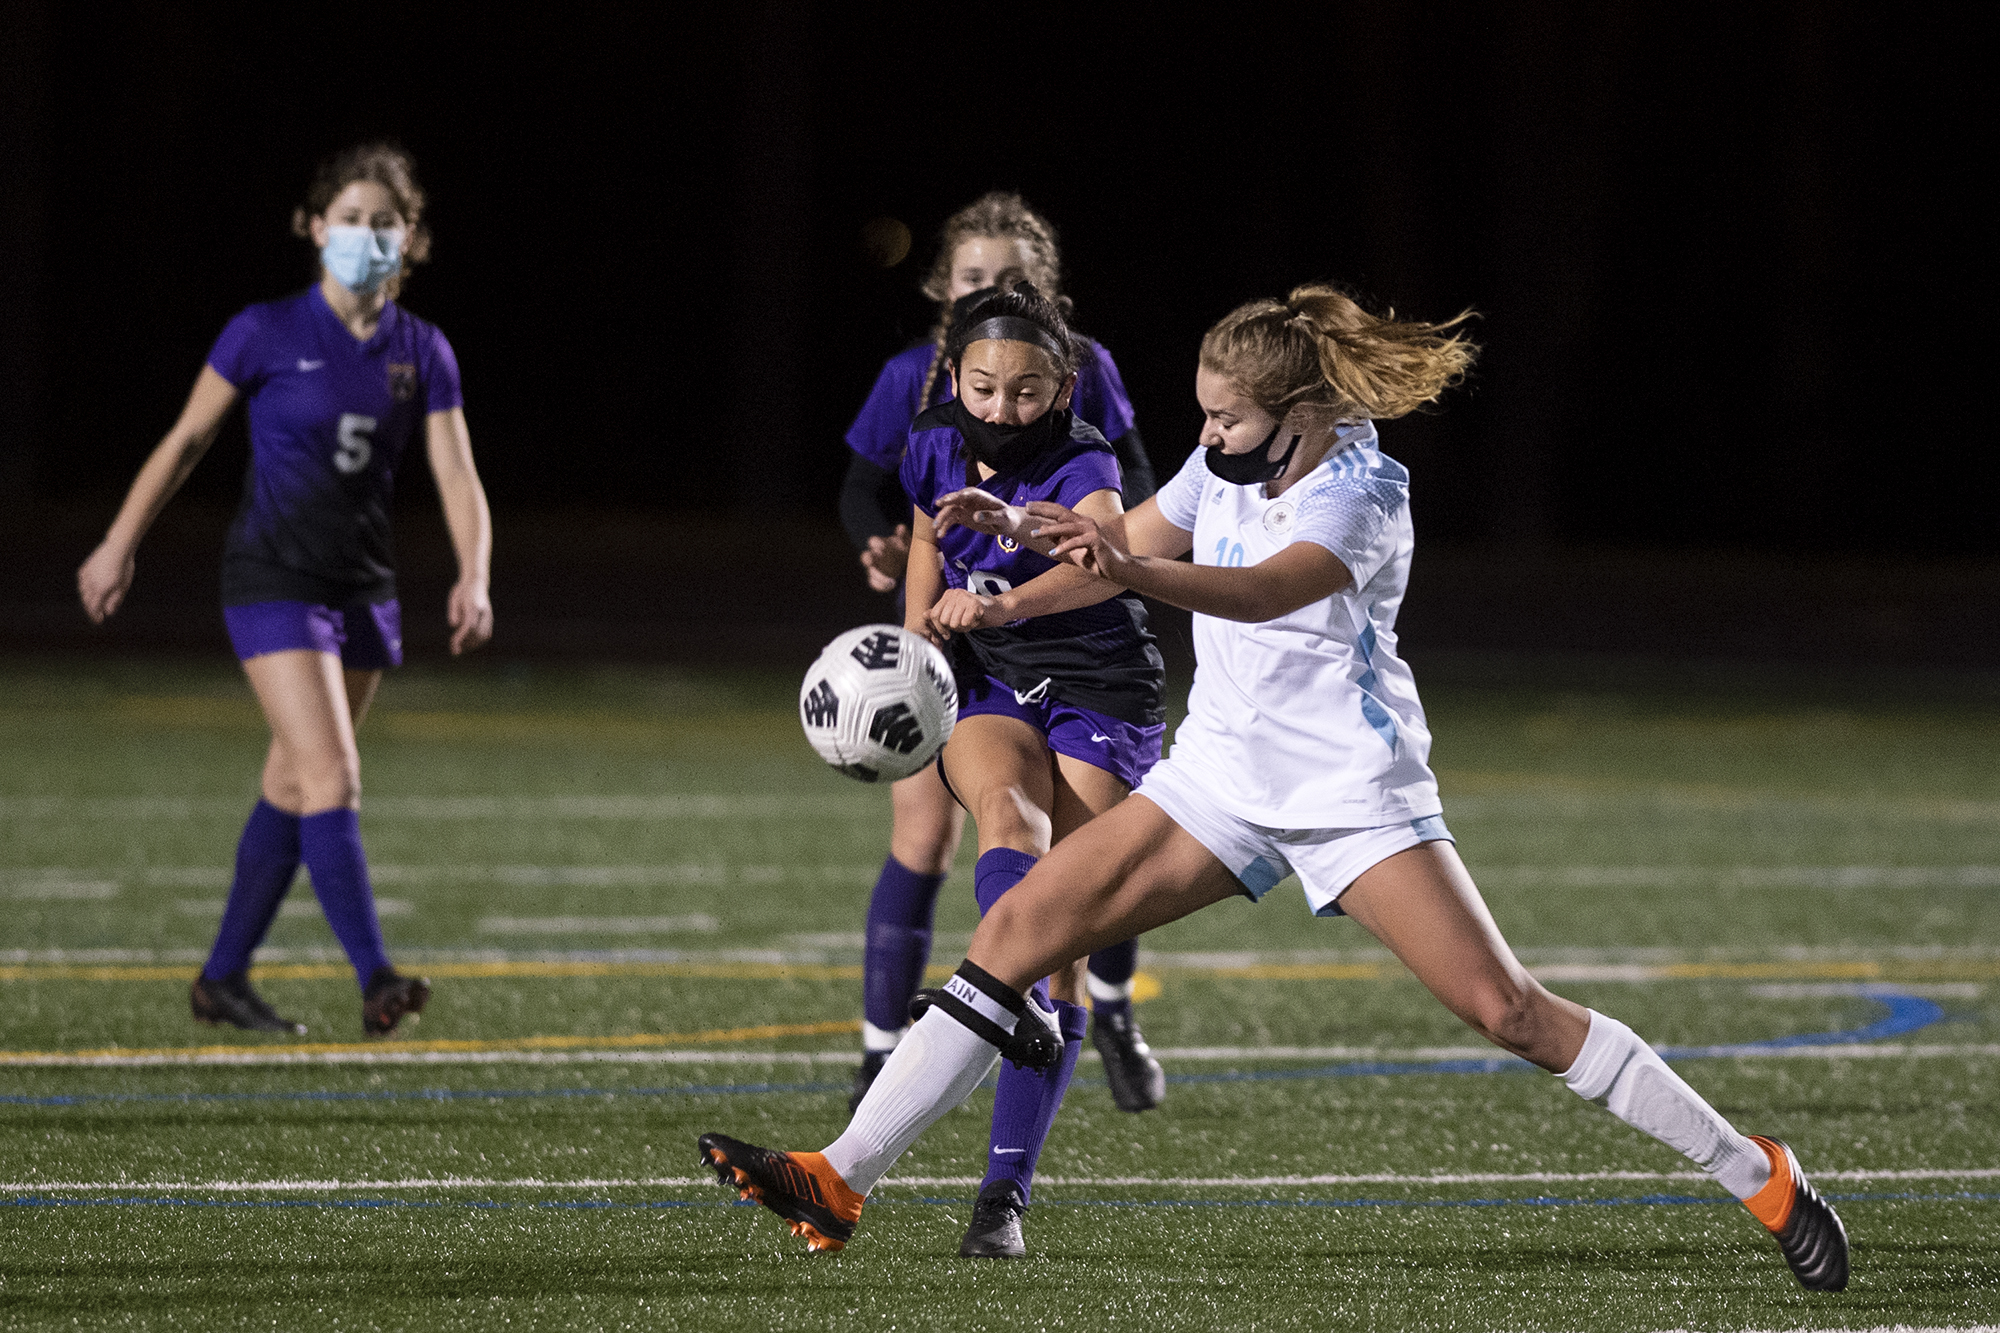 Columbia River’s Andie Buckley passes it past the defense of Hockinson’s Payton Lawson on Saturday, February 27, 2021, at Columbia River High School. The Hawks earned a 1-0 victory over Columbia River in a rematch of the 2019 2A State girls soccer championship.